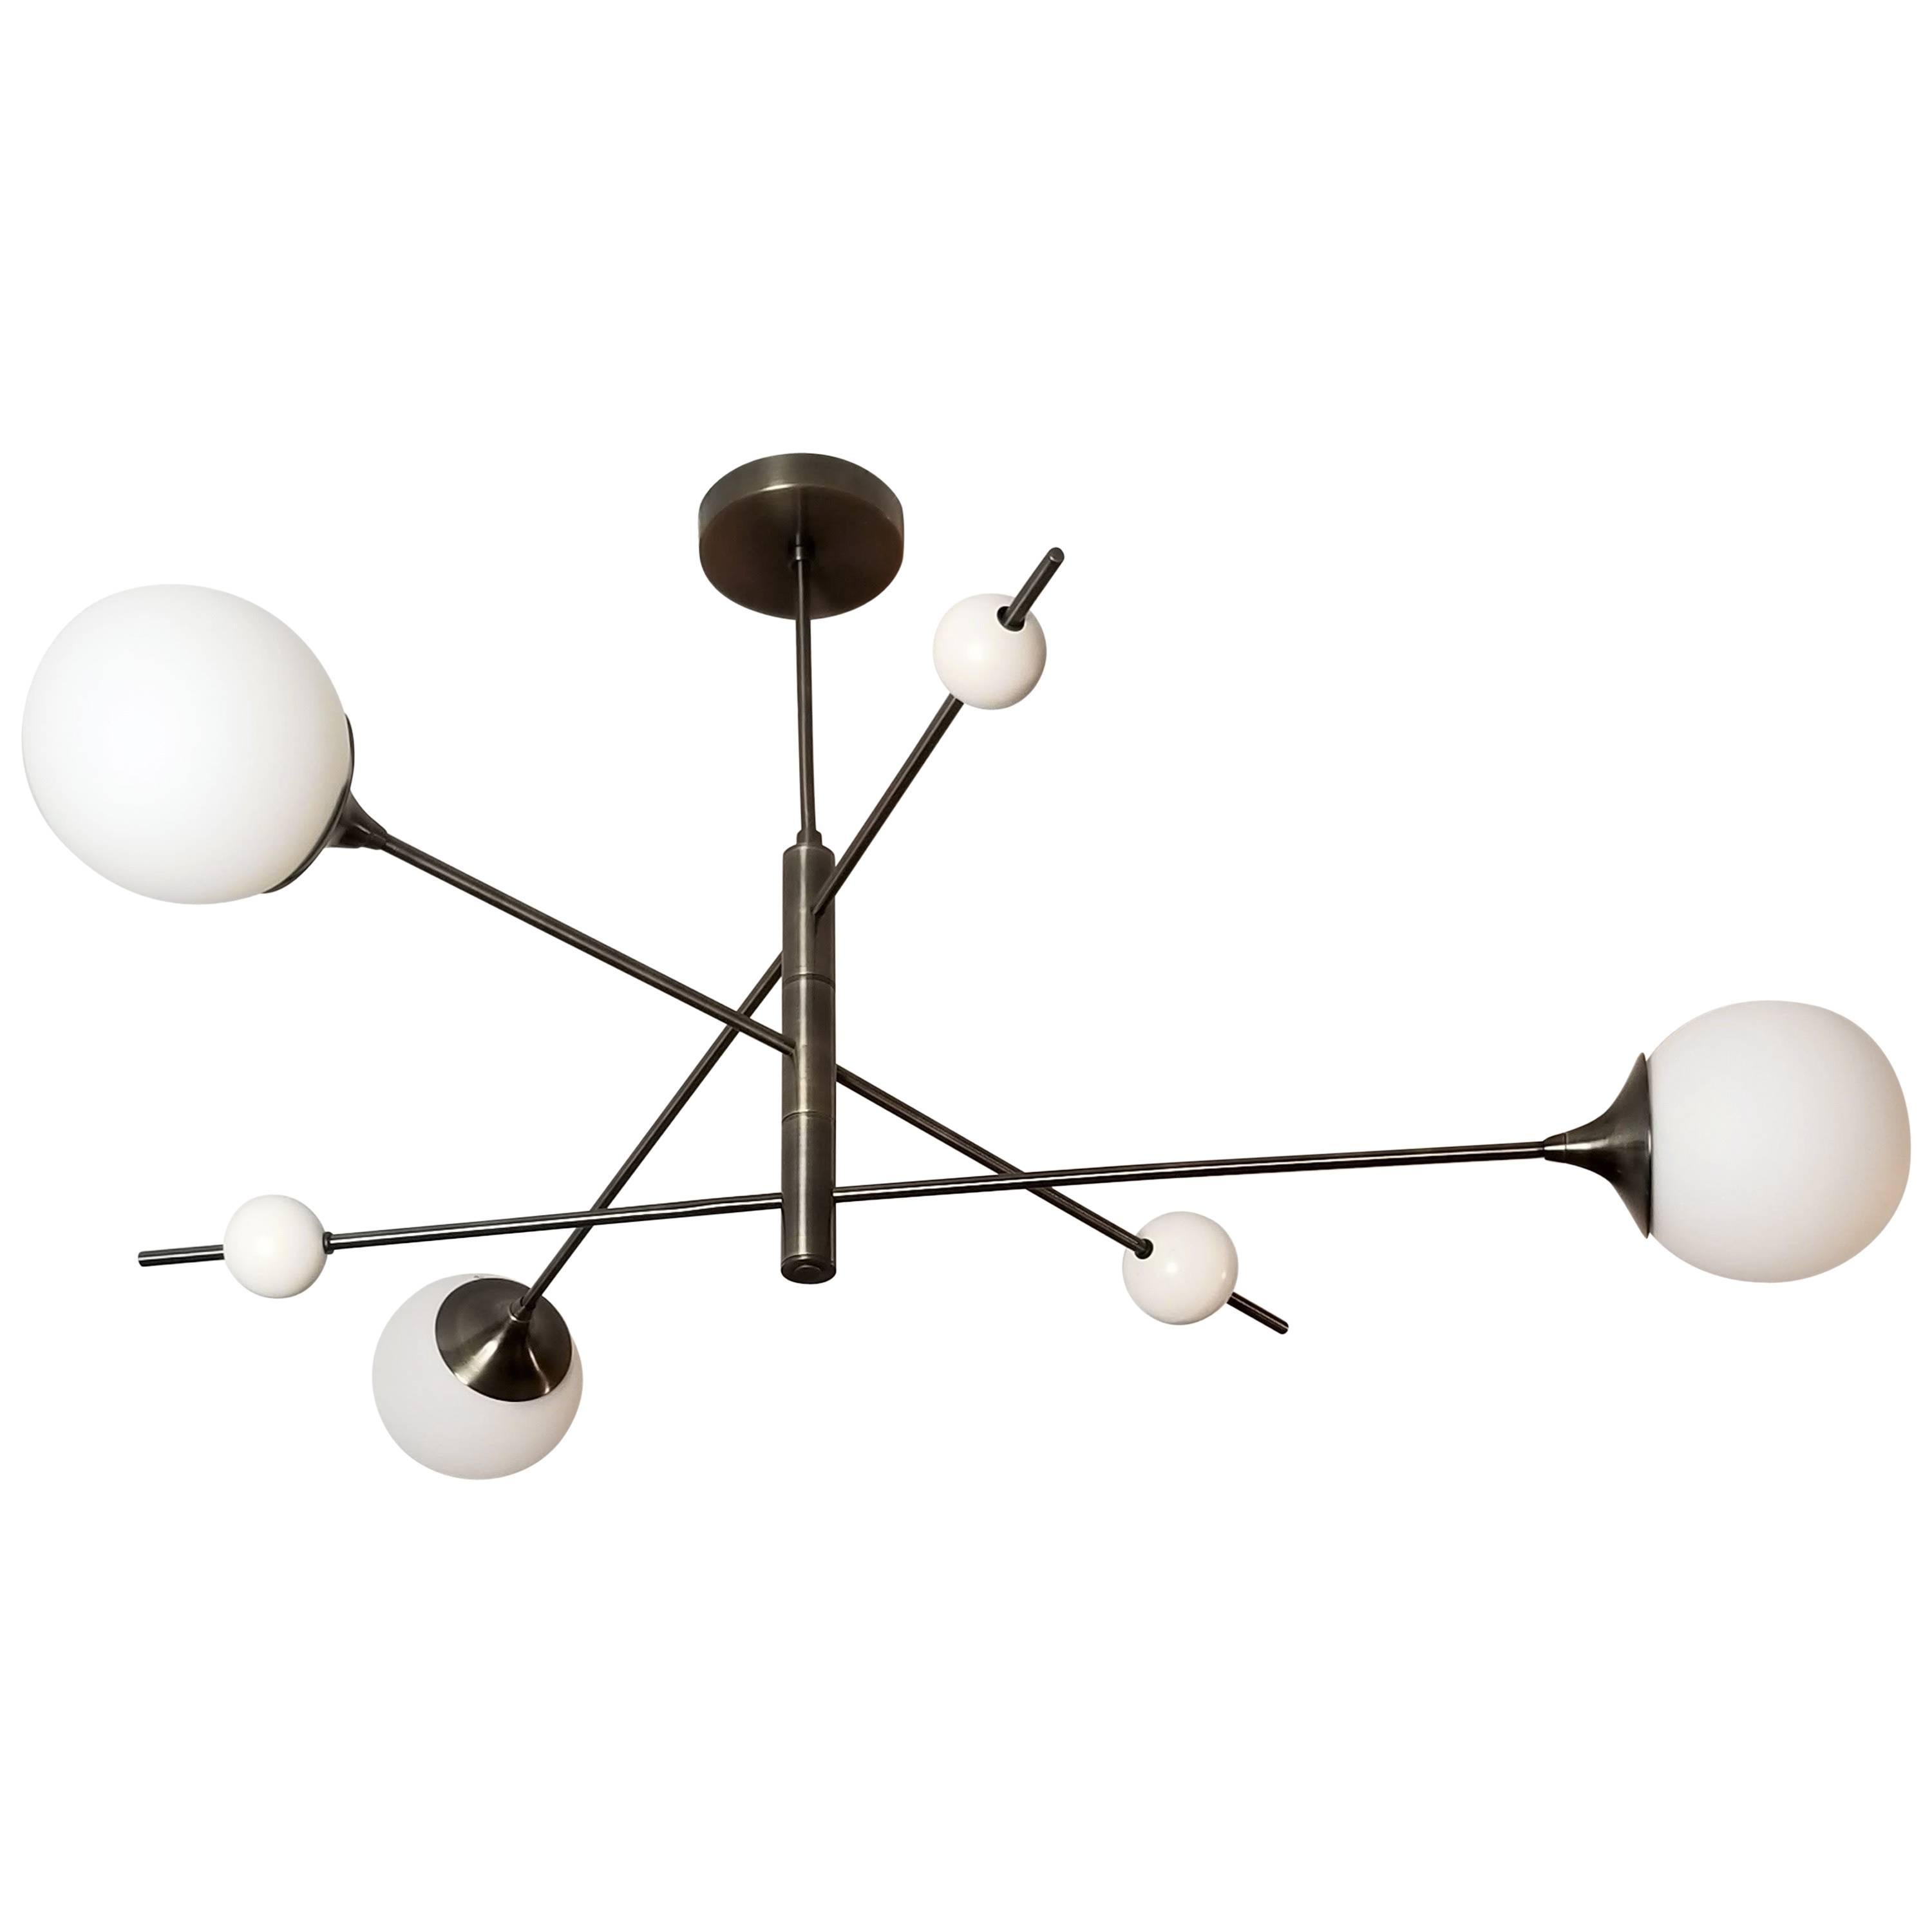 Handcrafted in NYC by Blueprint Lighting, our 'Orbital' three-arm pendant is a more compact version of our wildly popular 'Orbital' six-arm chandelier. It's a commanding statement piece with design elements of both Italian and French modernism and